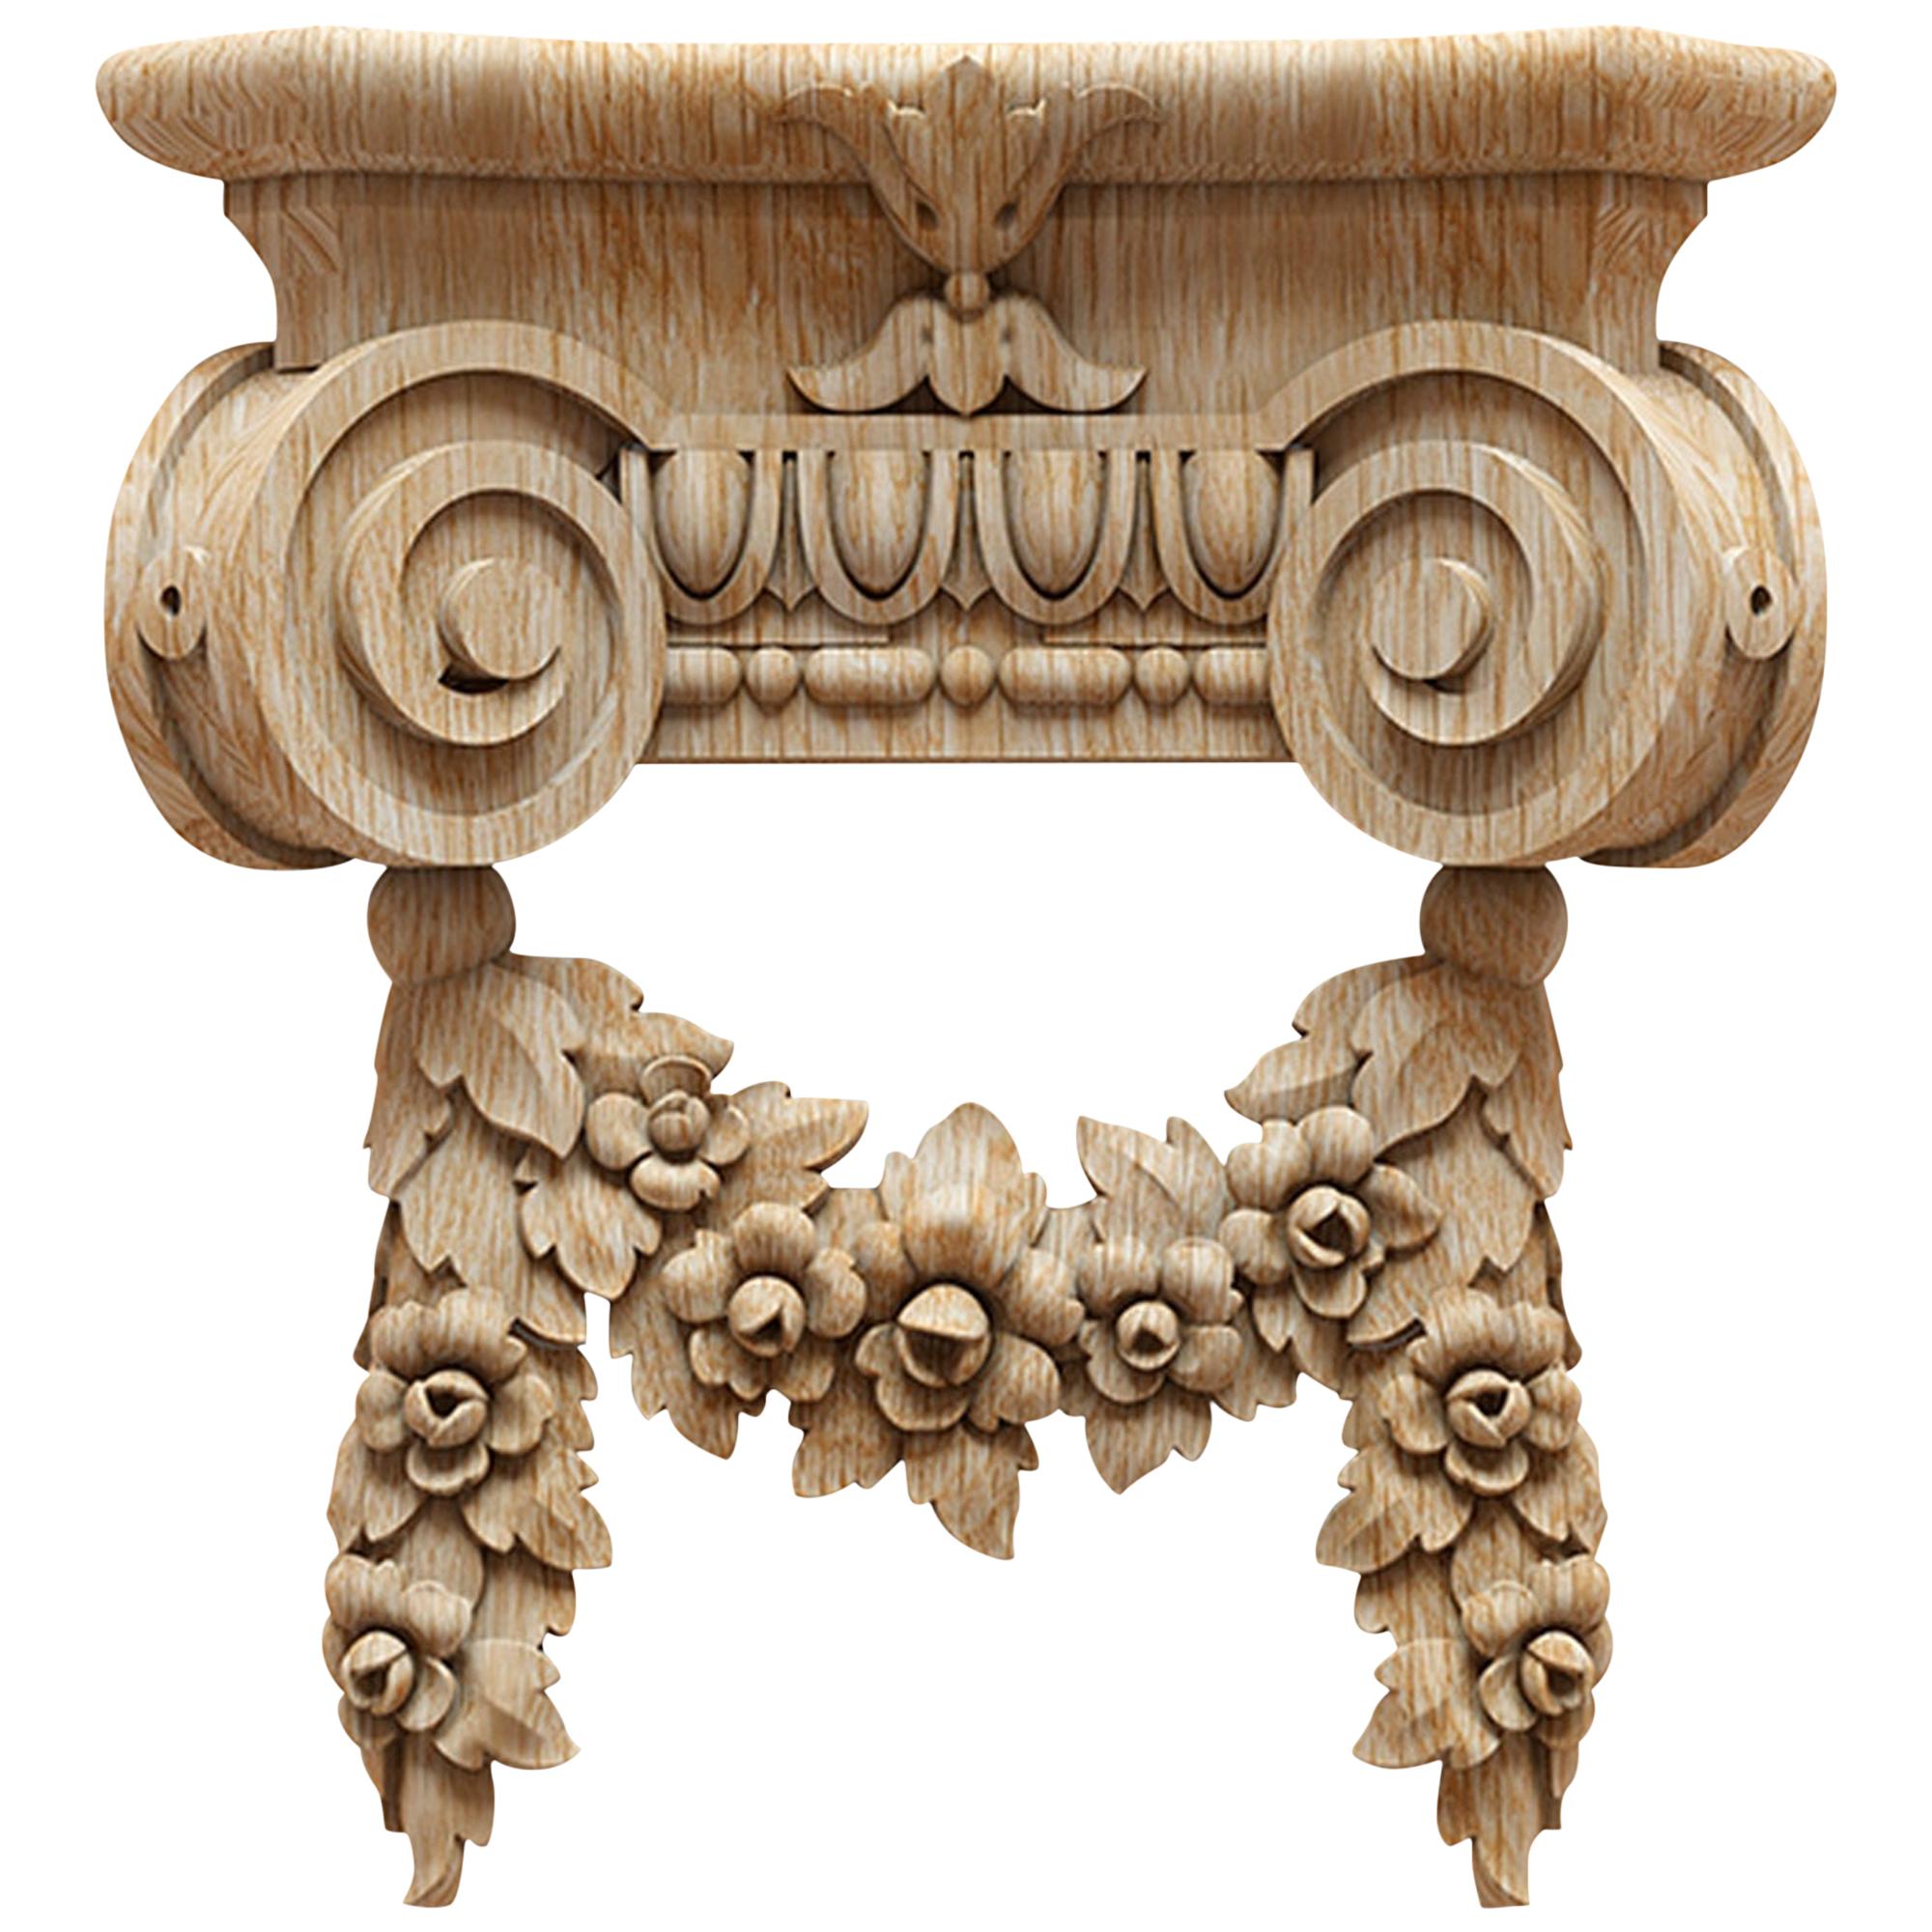 Ionic Flower Decorative Column Capital for Walls, Doors, Furniture, Interior For Sale